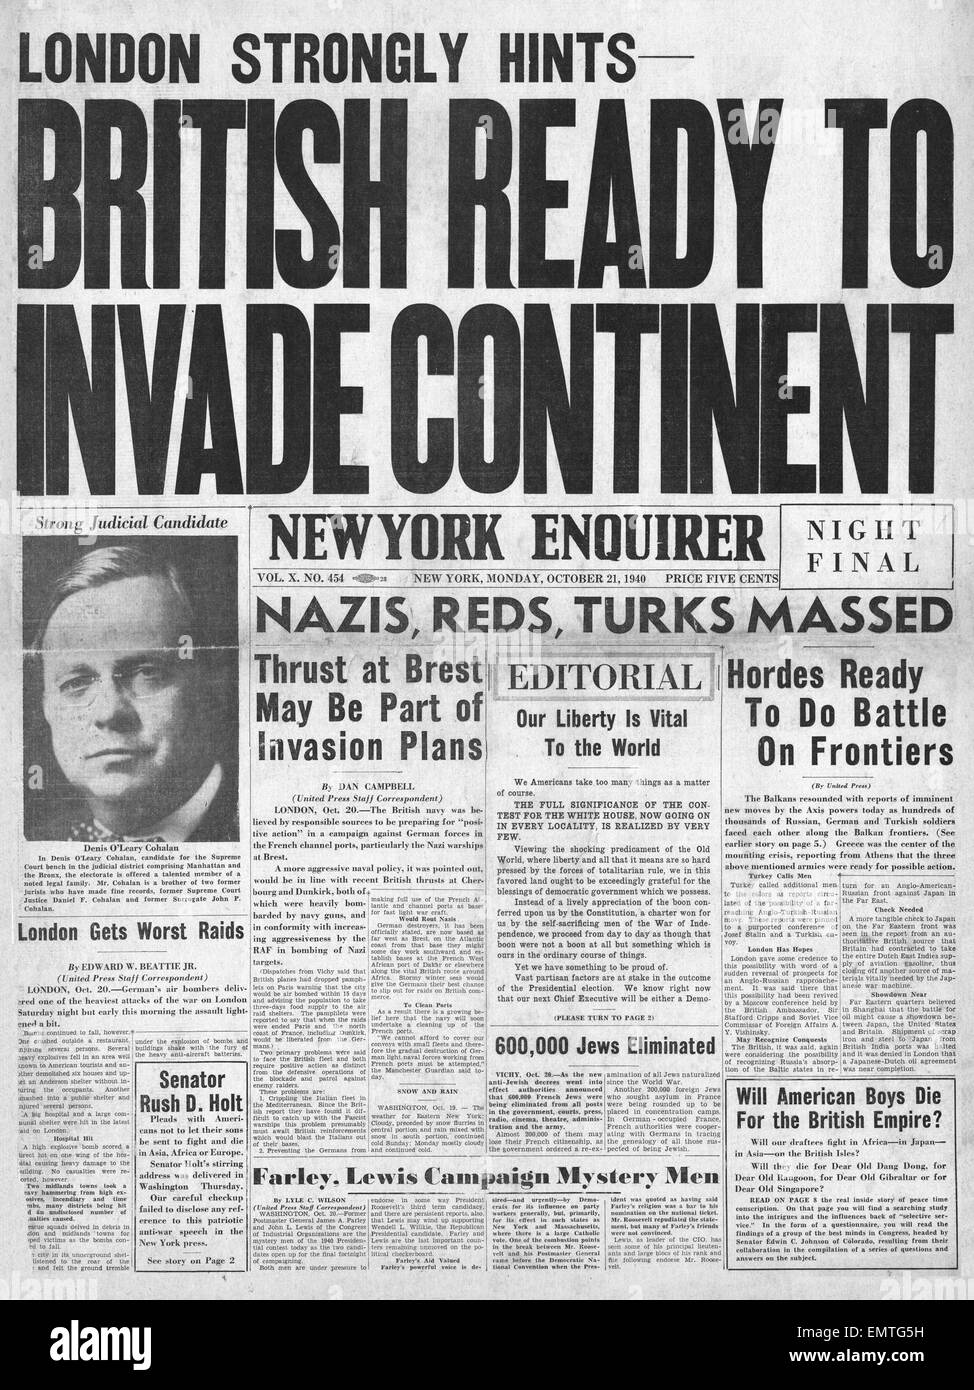 1940 front page New York Enquirer British ready to Invade Continent rumour  Stock Photo - Alamy